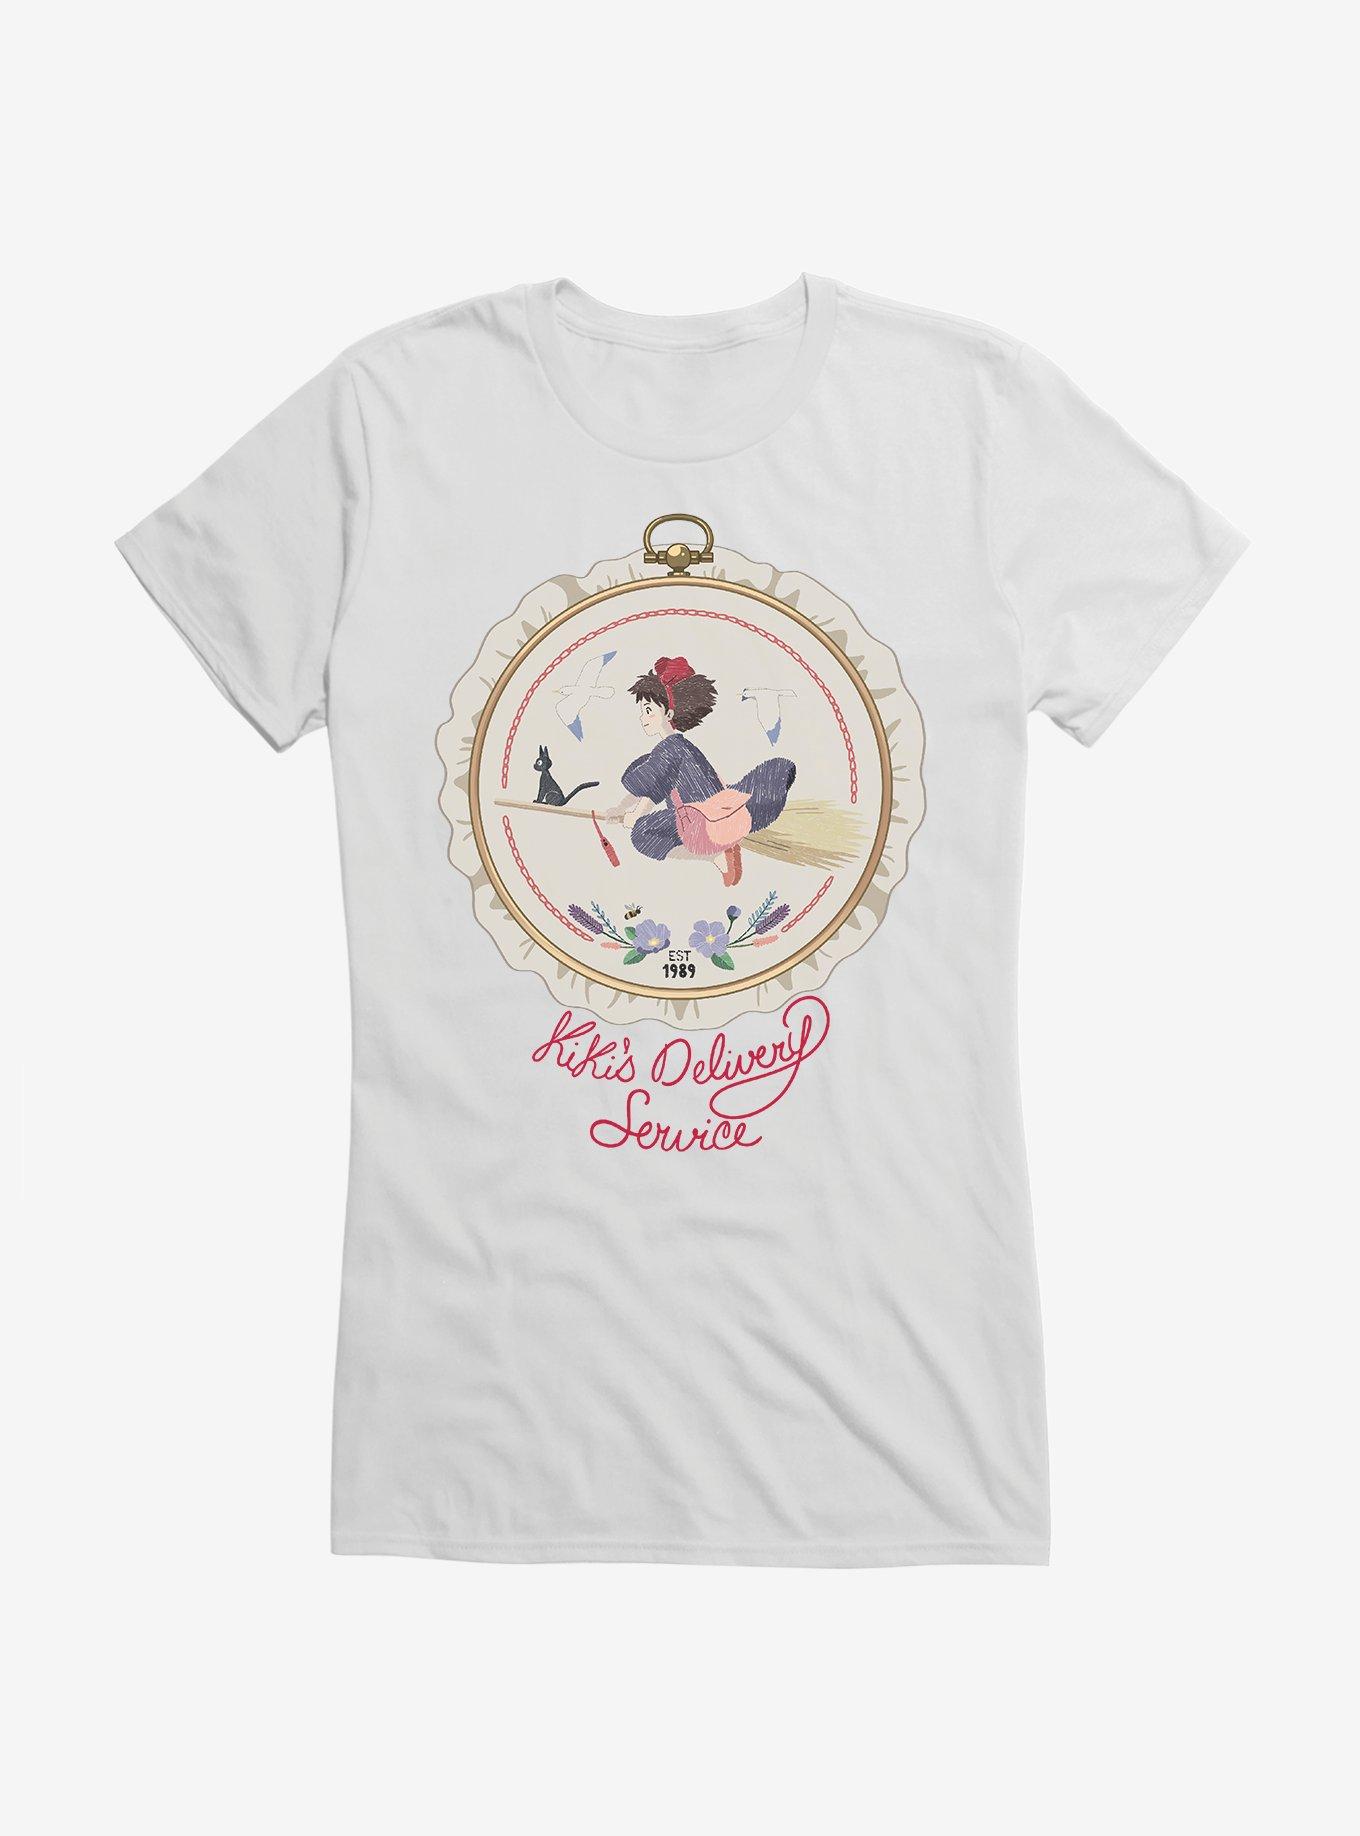 Studio Ghibli Kiki's Delivery Service Sewing Patch Girls T-Shirt, WHITE, hi-res